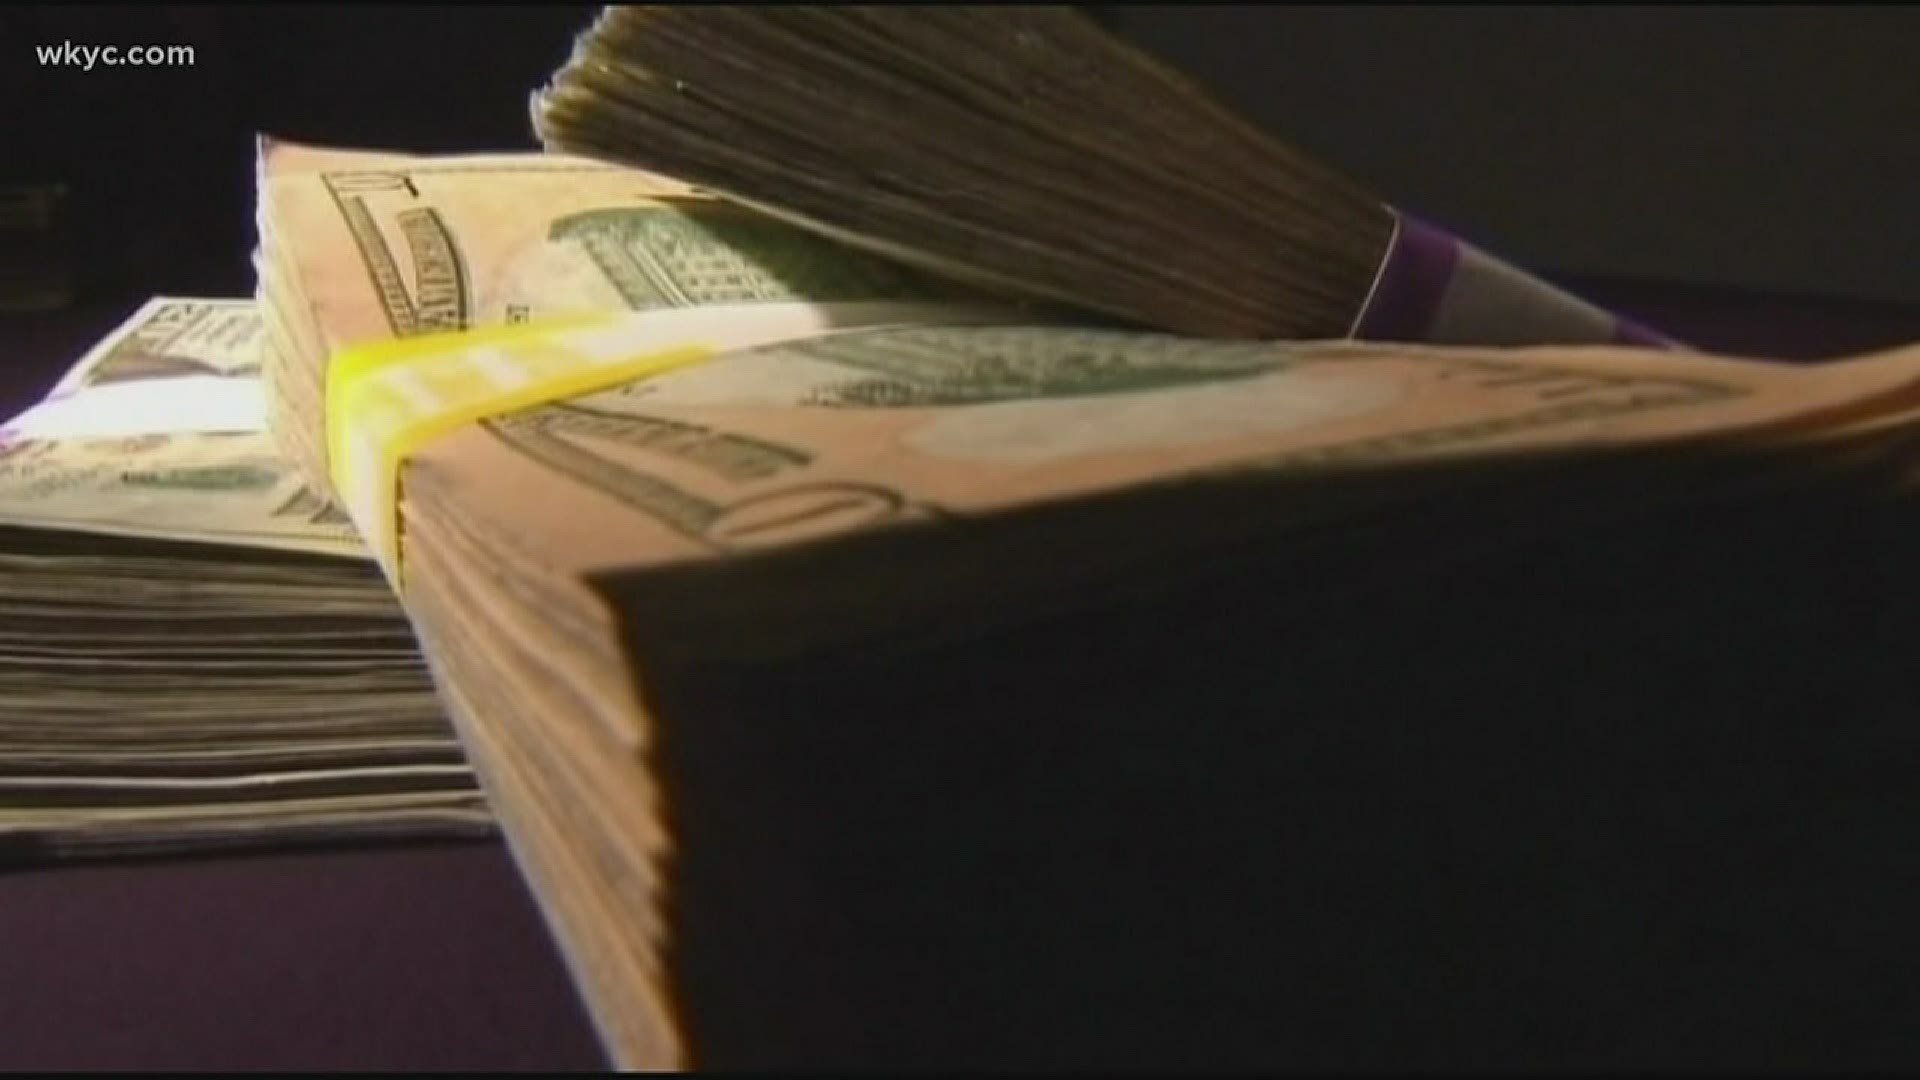 3News' Danielle Serino talks with a woman who has seen financial relief come amid the pandemic. She shares her tips.